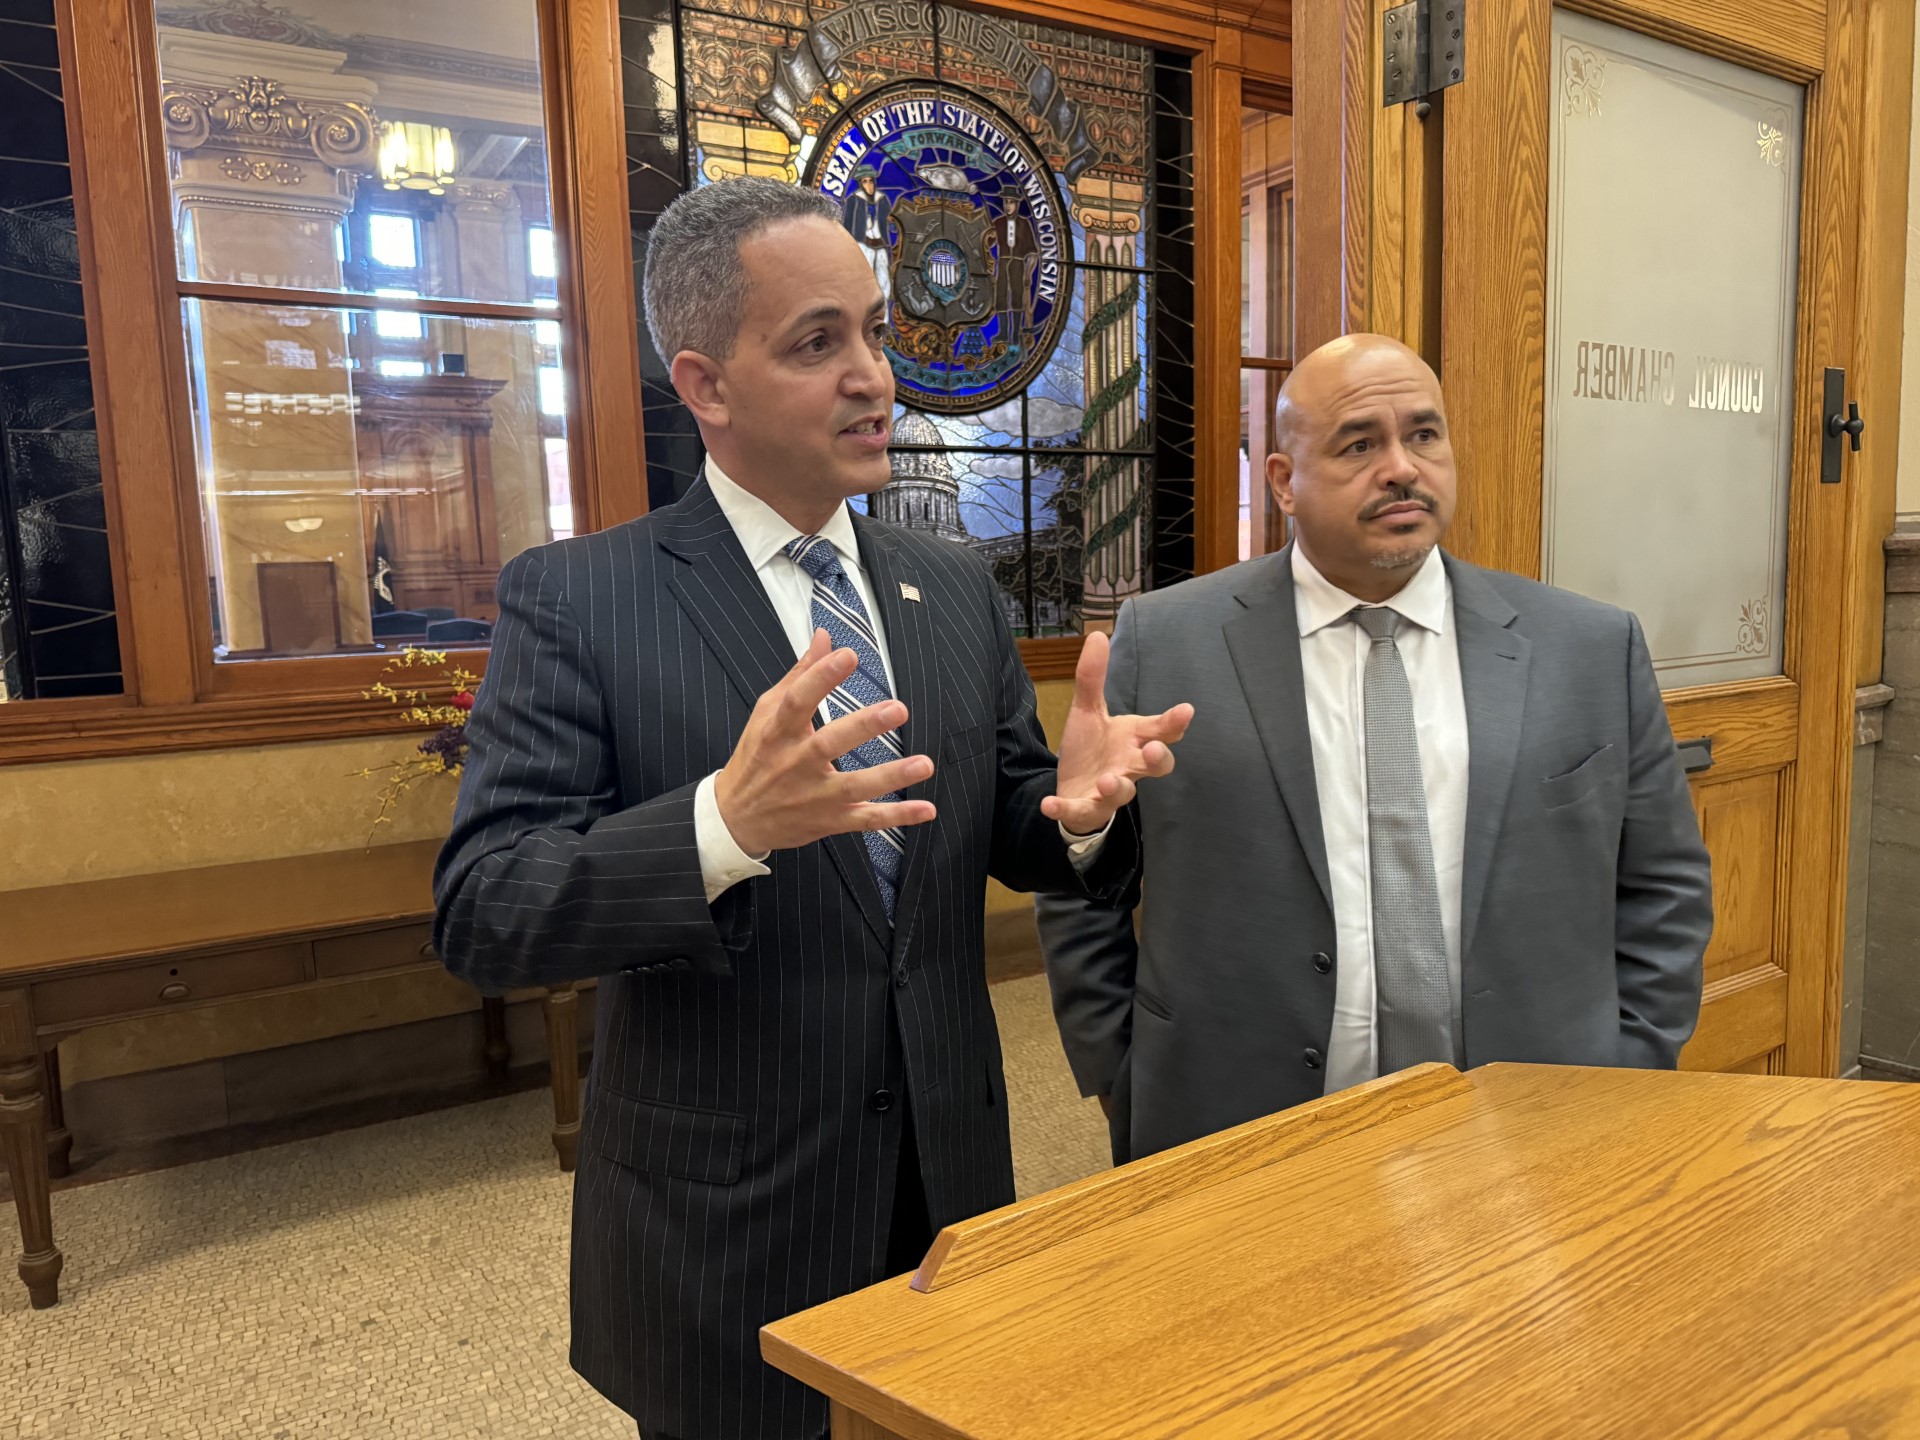 US Deputy Secretary of Commerce makes Milwaukee stop, visits with Latino leaders